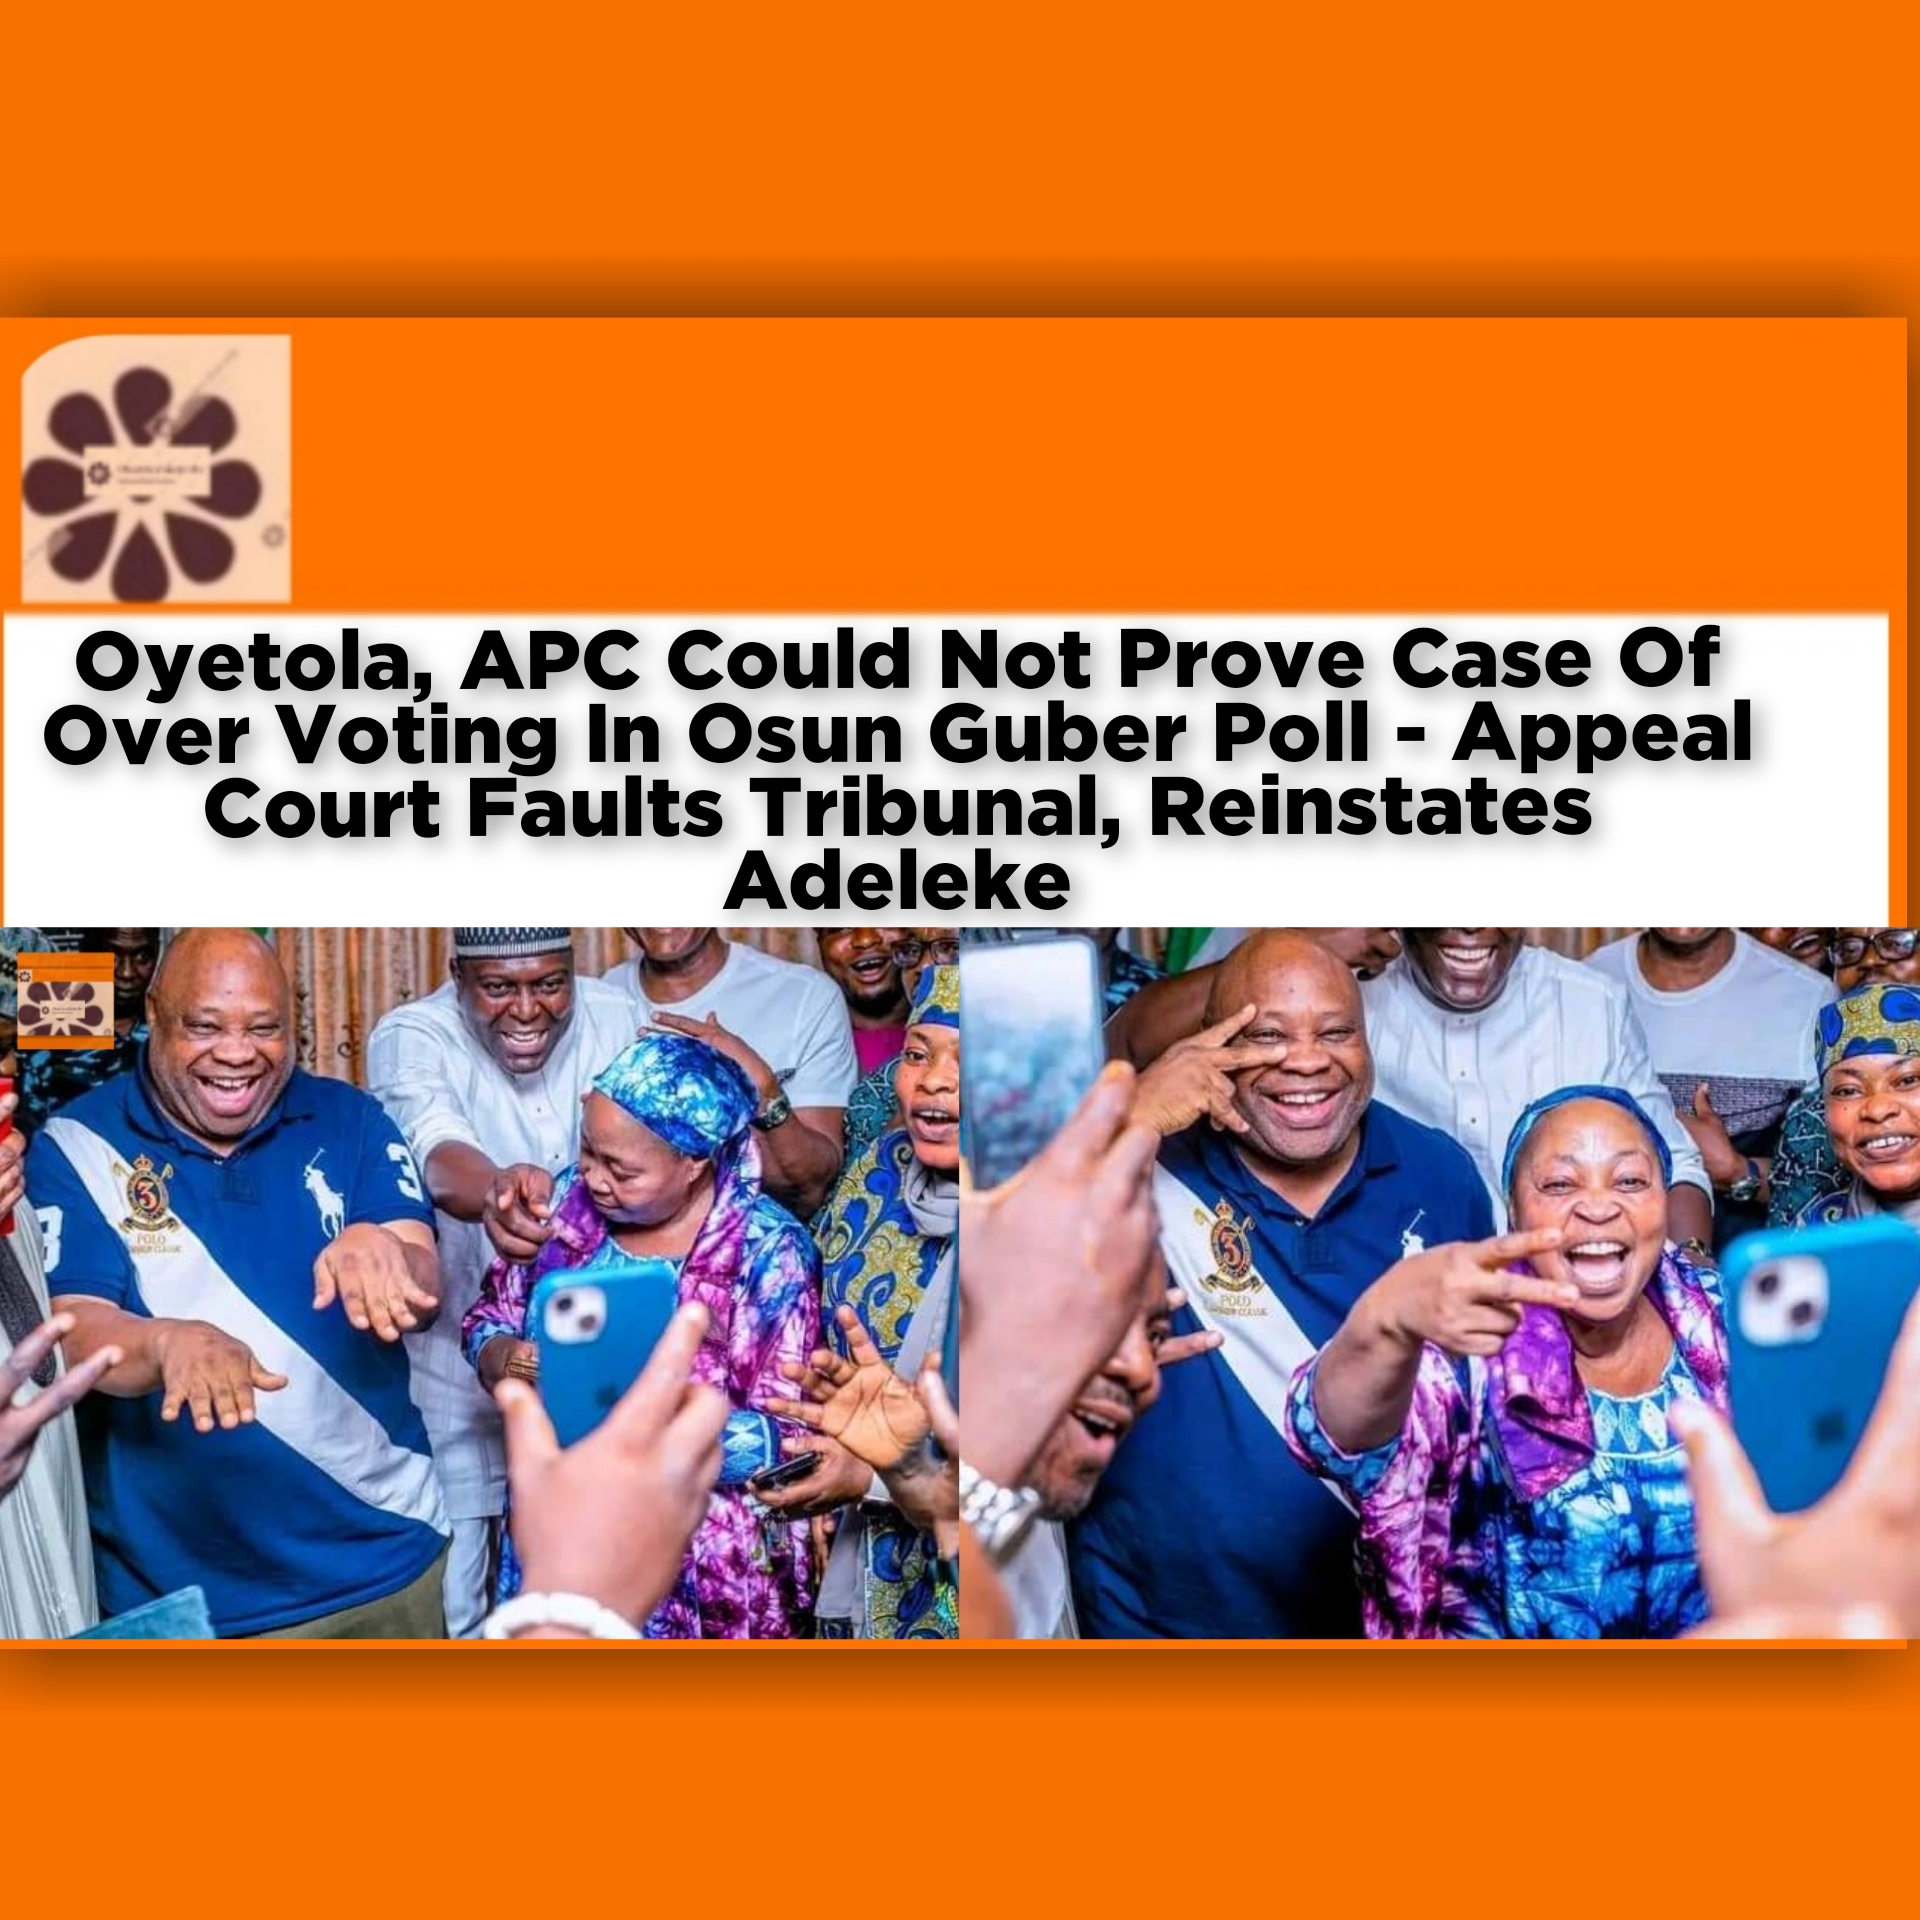 Oyetola, APC Could Not Prove Case Of Over Voting In Osun Guber Poll - Appeal Court Faults Tribunal, Reinstates Adeleke ~ OsazuwaAkonedo #army